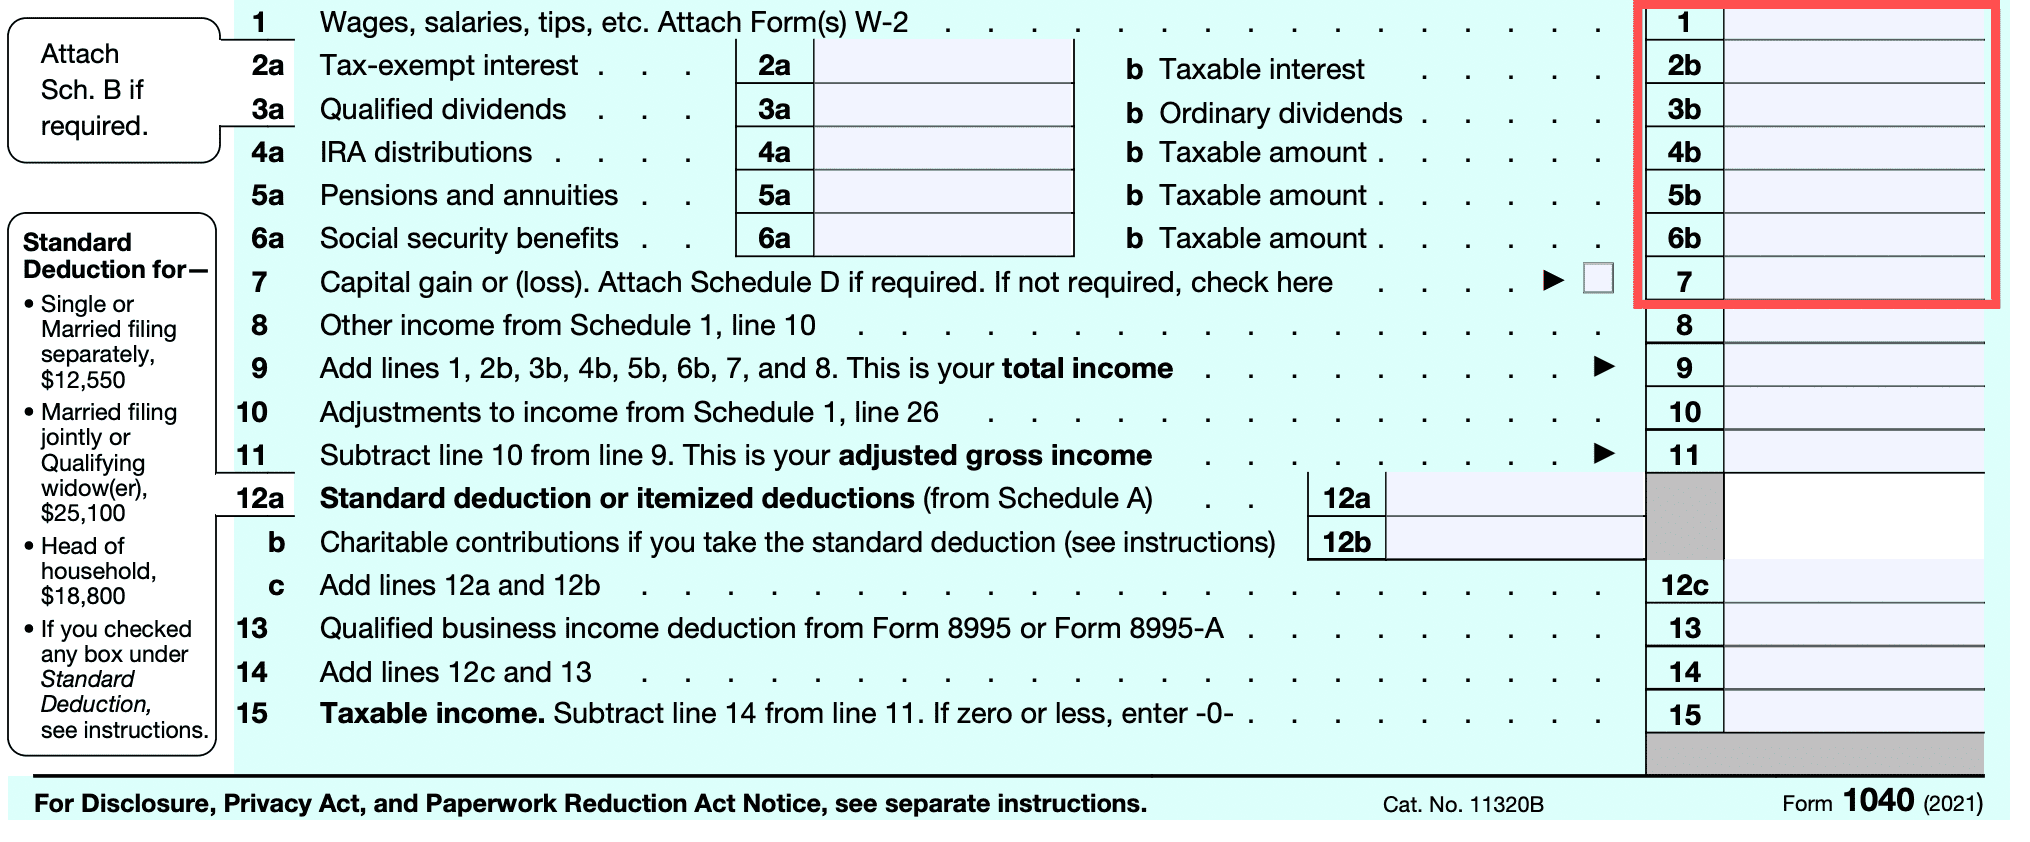 Image of Form 1040 with instructions for reporting income, deductions, and calculating taxes. Includes standard deduction amounts for different filing statuses.